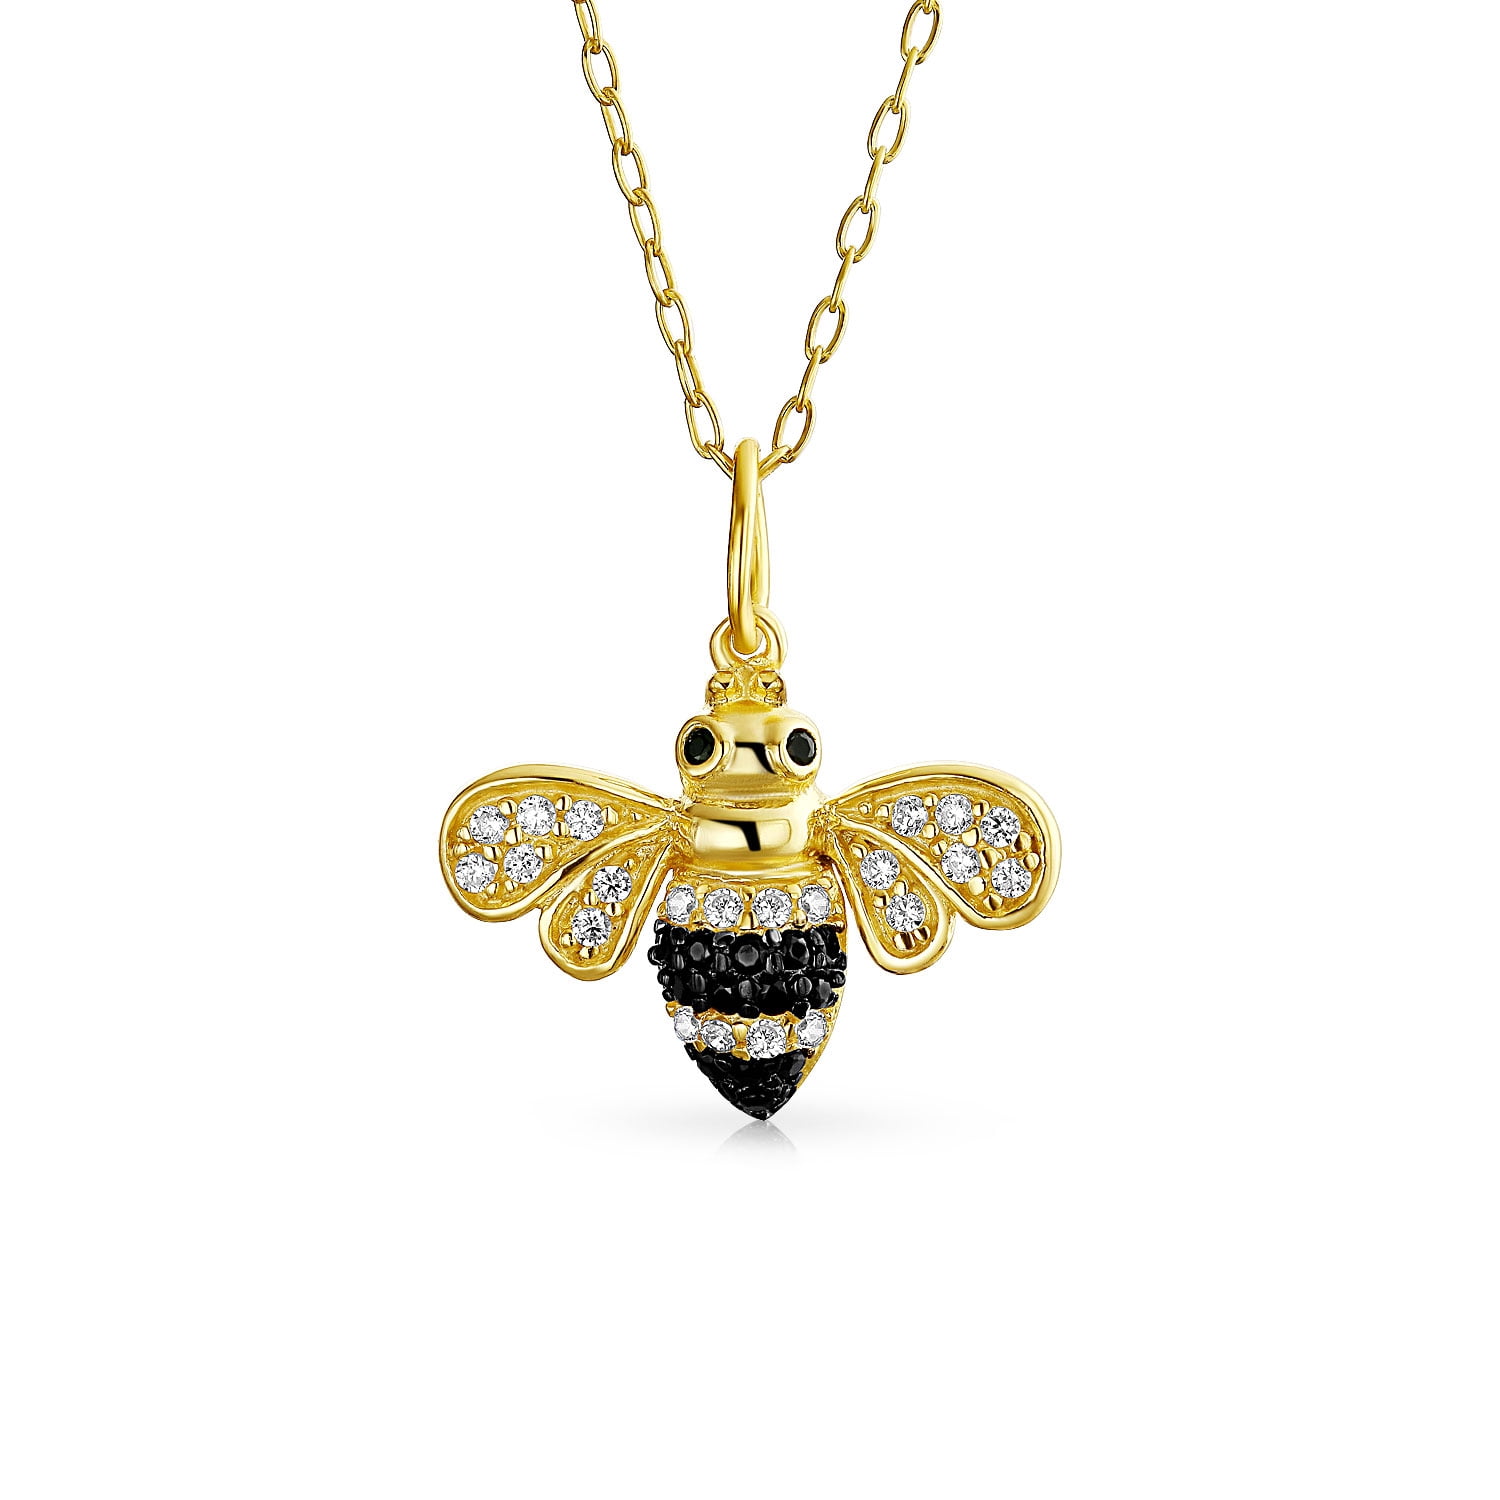 Gold Bee Charm Pendant Necklace For Women Sterling Silver Bee jewelry To Gift For Her